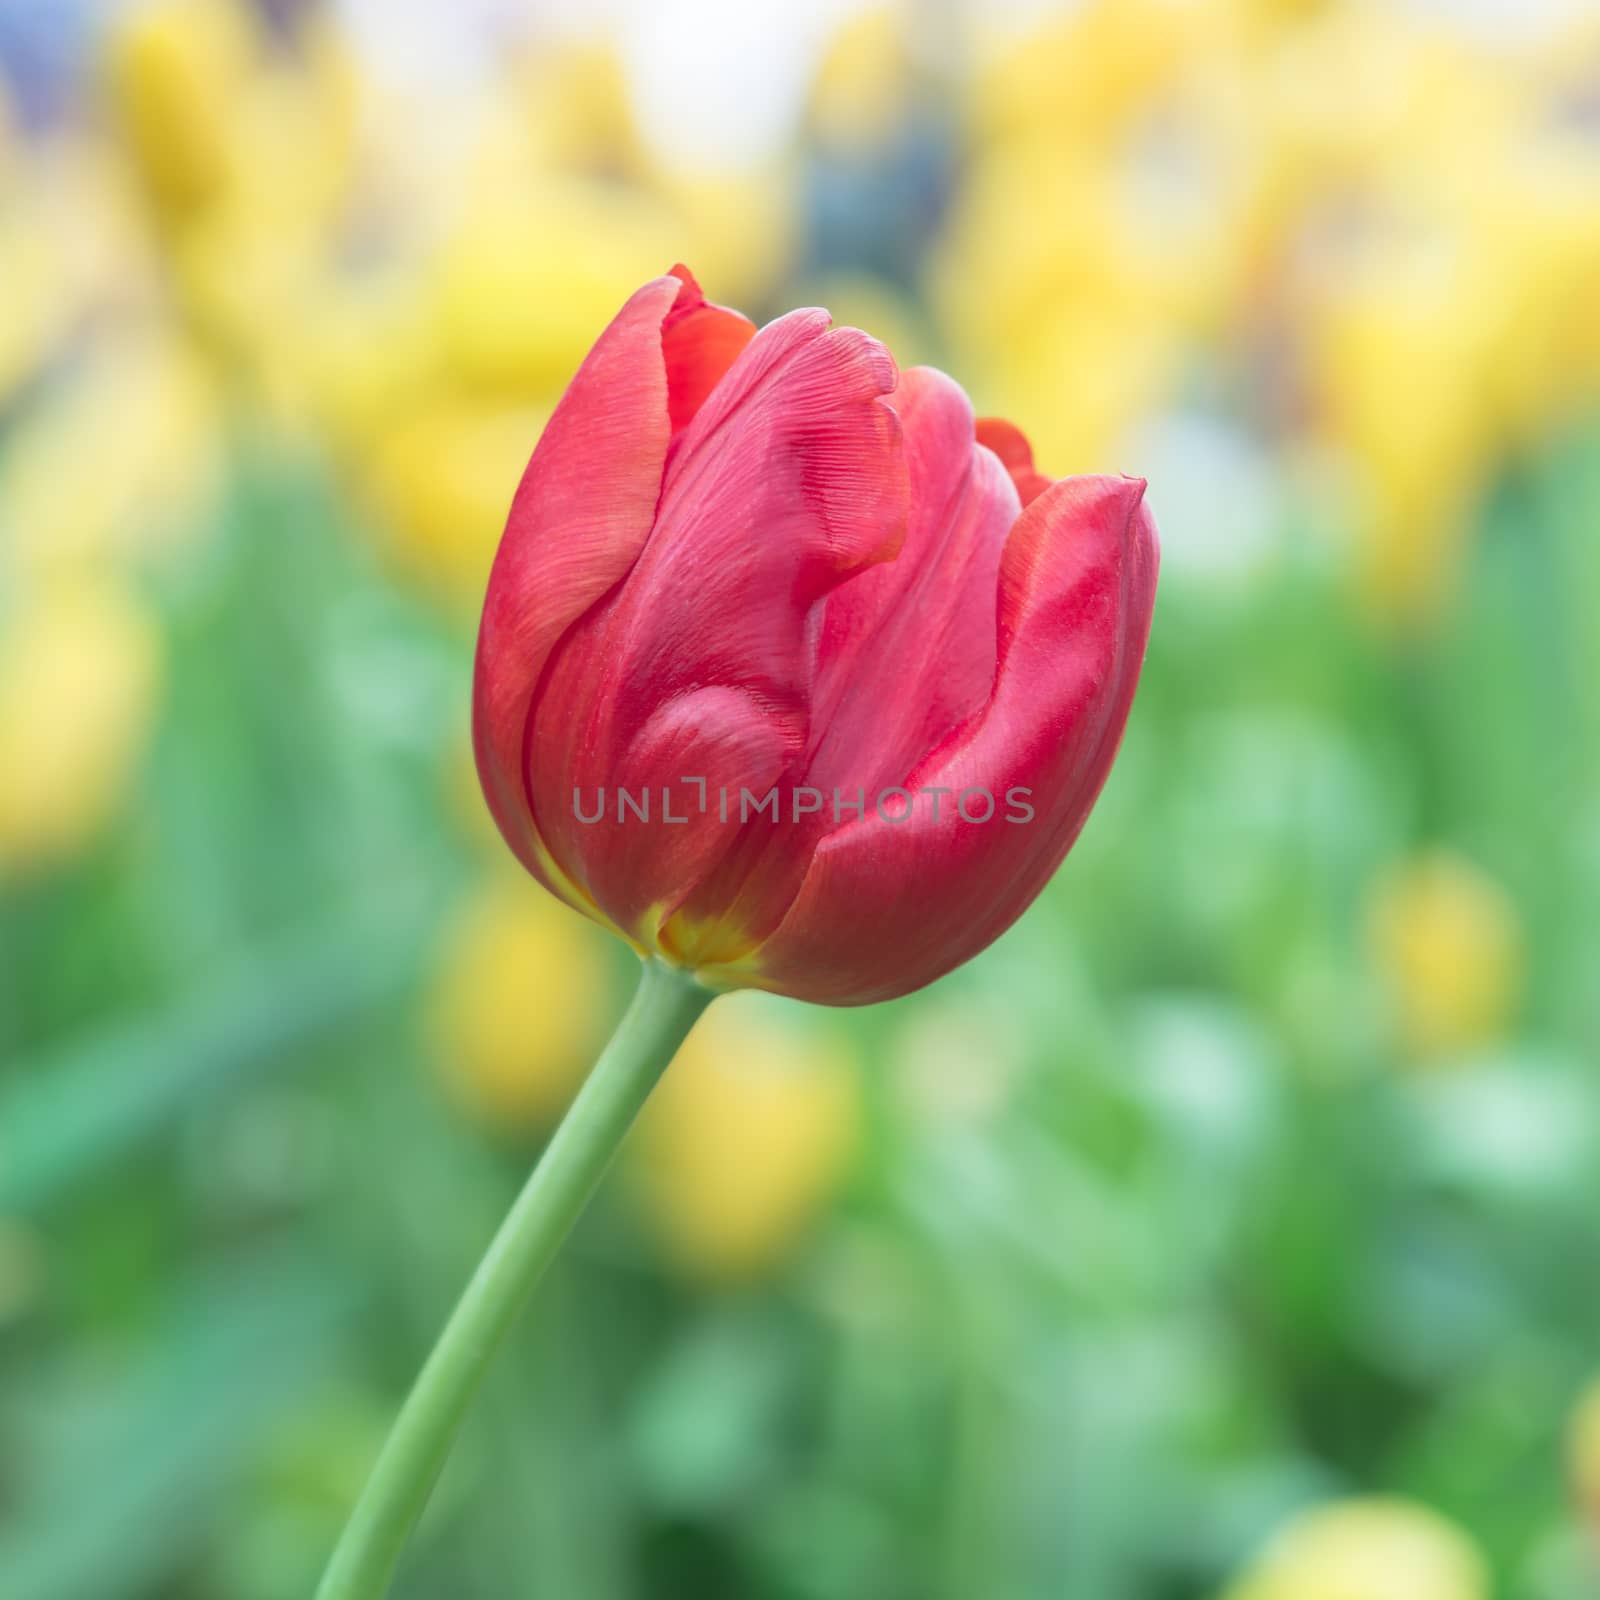 Colorful red tulip photographed with a selective focus and a shallow depth of field